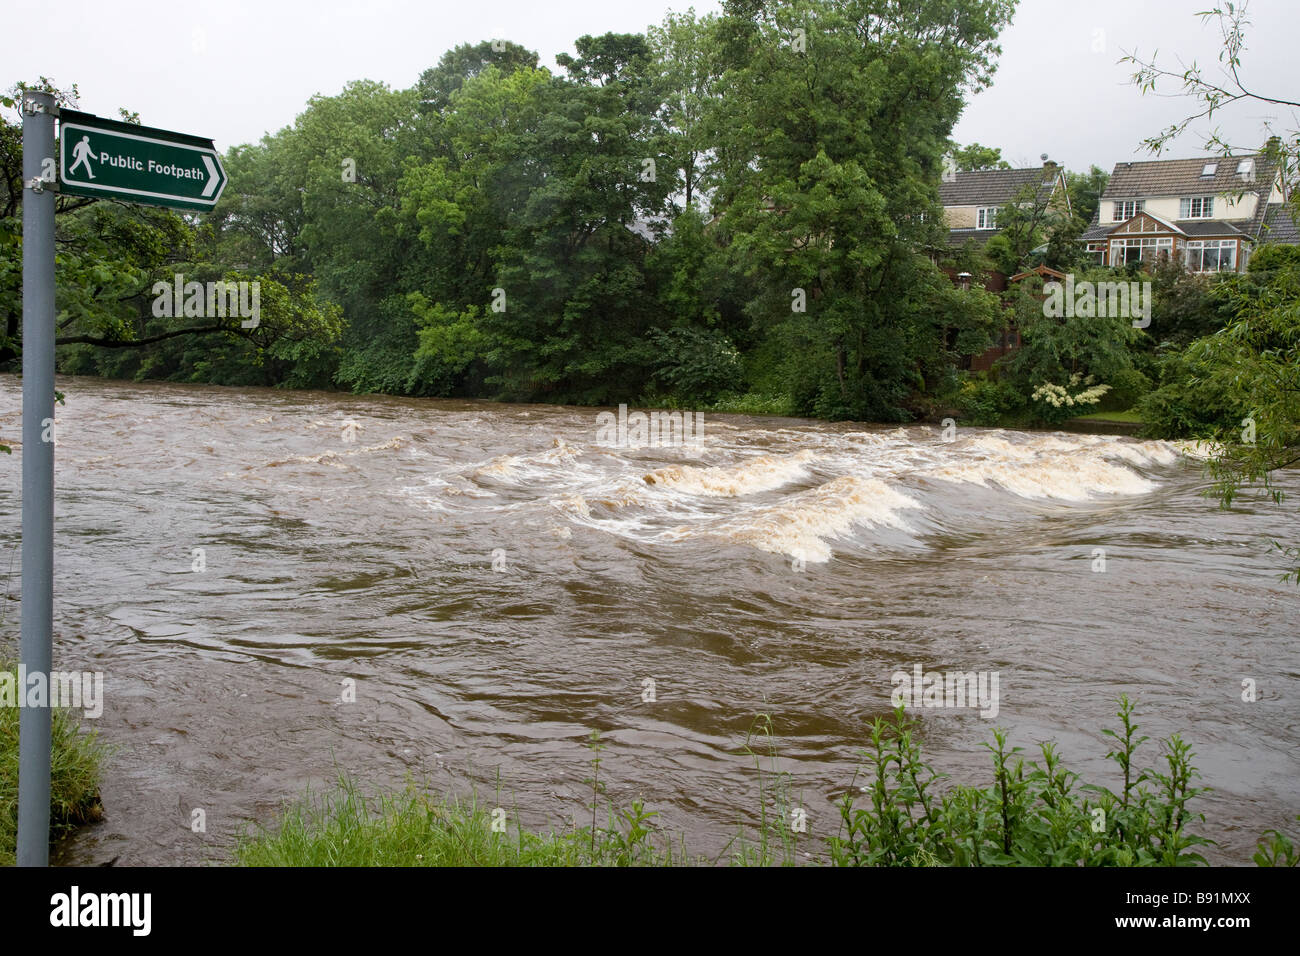 Footpath sign points to public footpath route across River Wharfe  (stepping stones submerged by fast flowing water) - Ilkley, Yorkshire, England, UK. Stock Photo